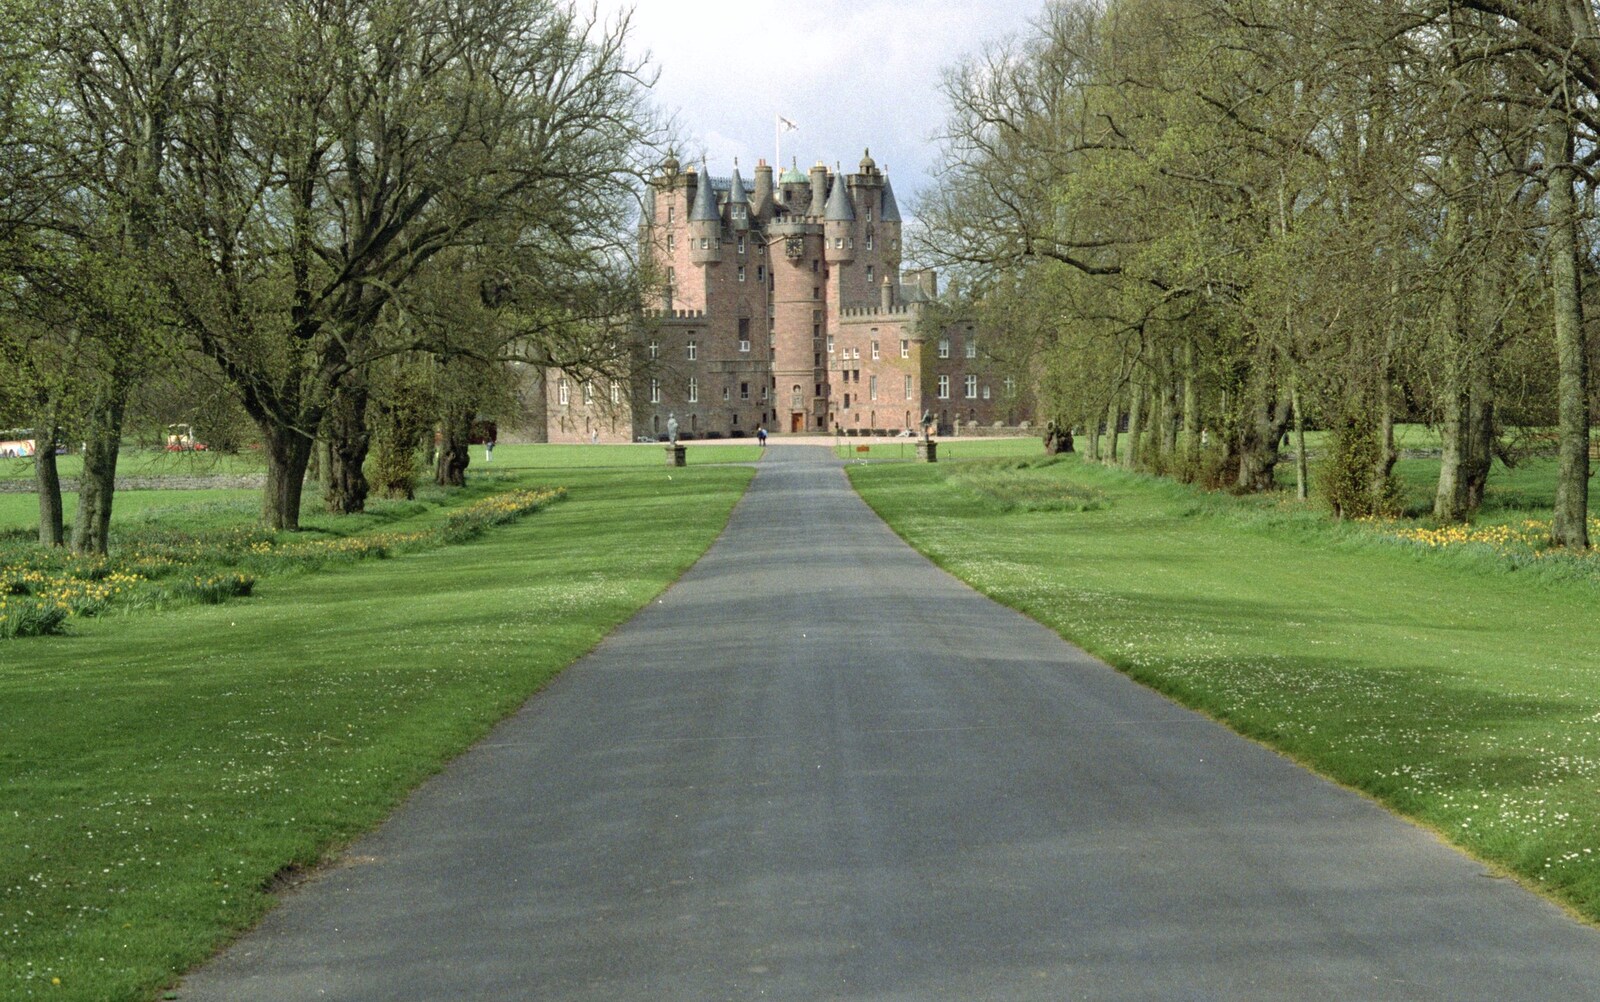 The drive up to Glamis Castle from A Trip to Pitlochry, Scotland - 24th March 1998